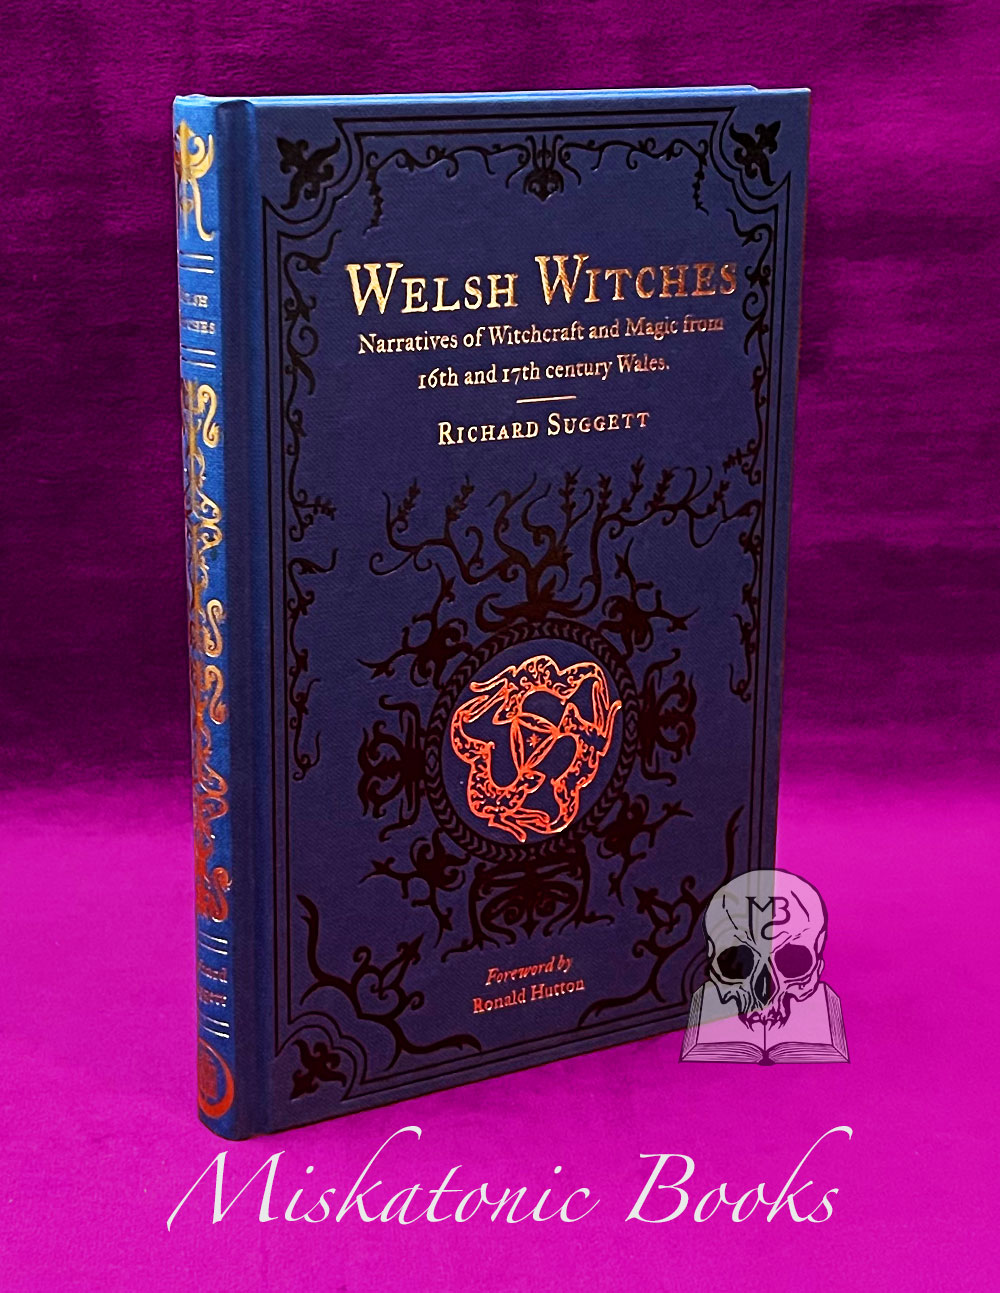 WELSH WITCHES: Narratives of Witchcraft and Magic from 16th and 17th Century Wales by Richard Suggett - Limited Edition Hardcover